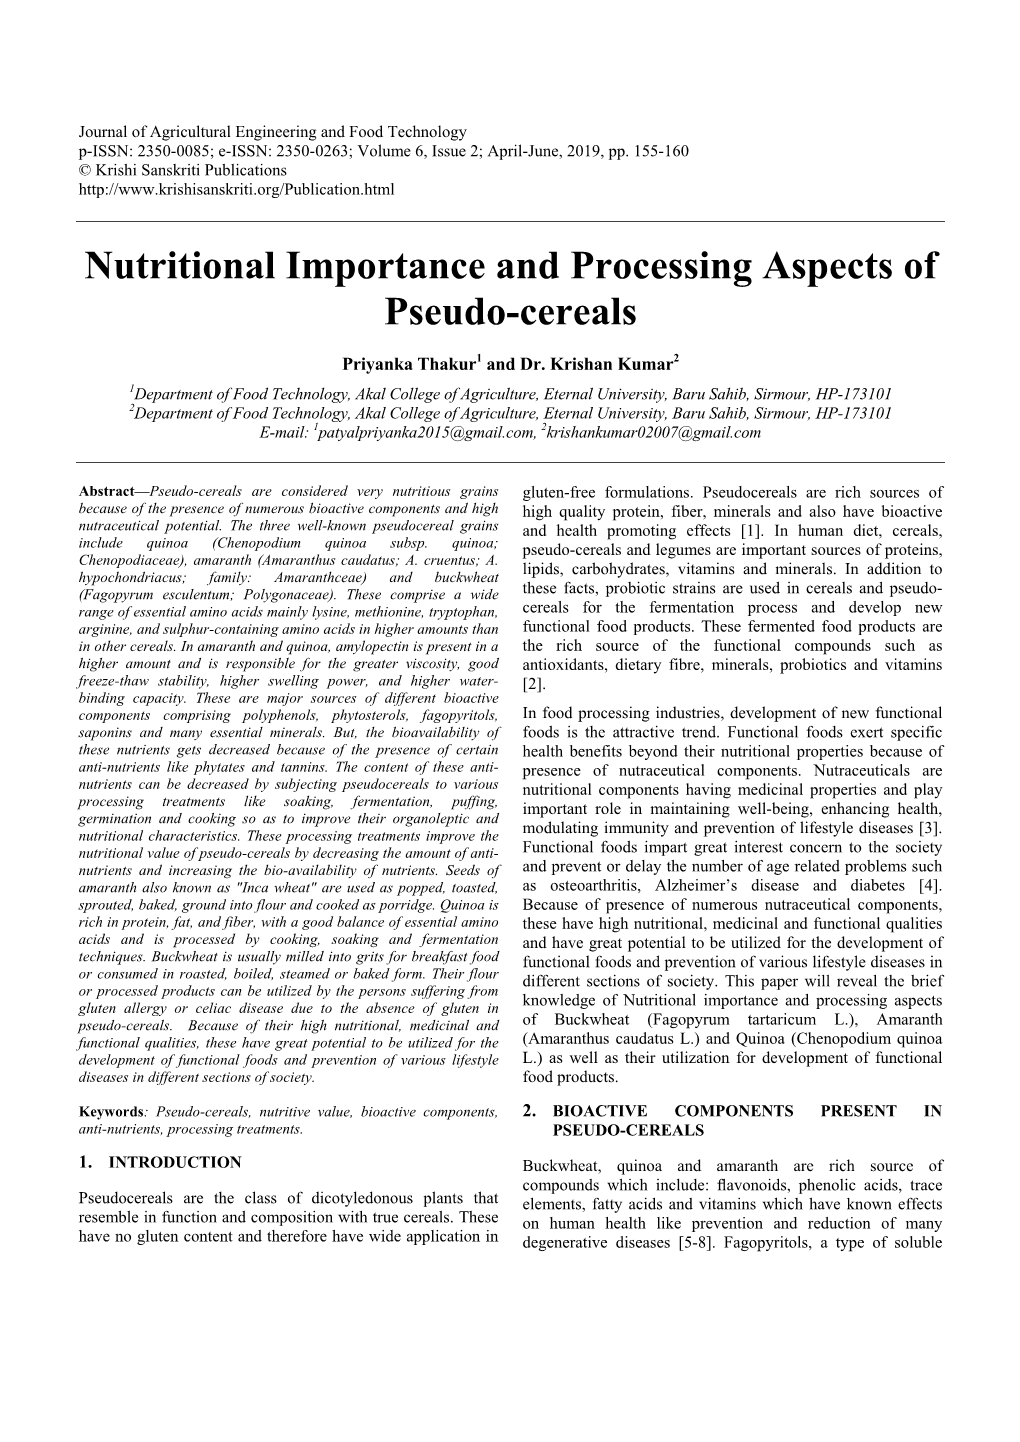 Nutritional Importance and Processing Aspects of Pseudo-Cereals